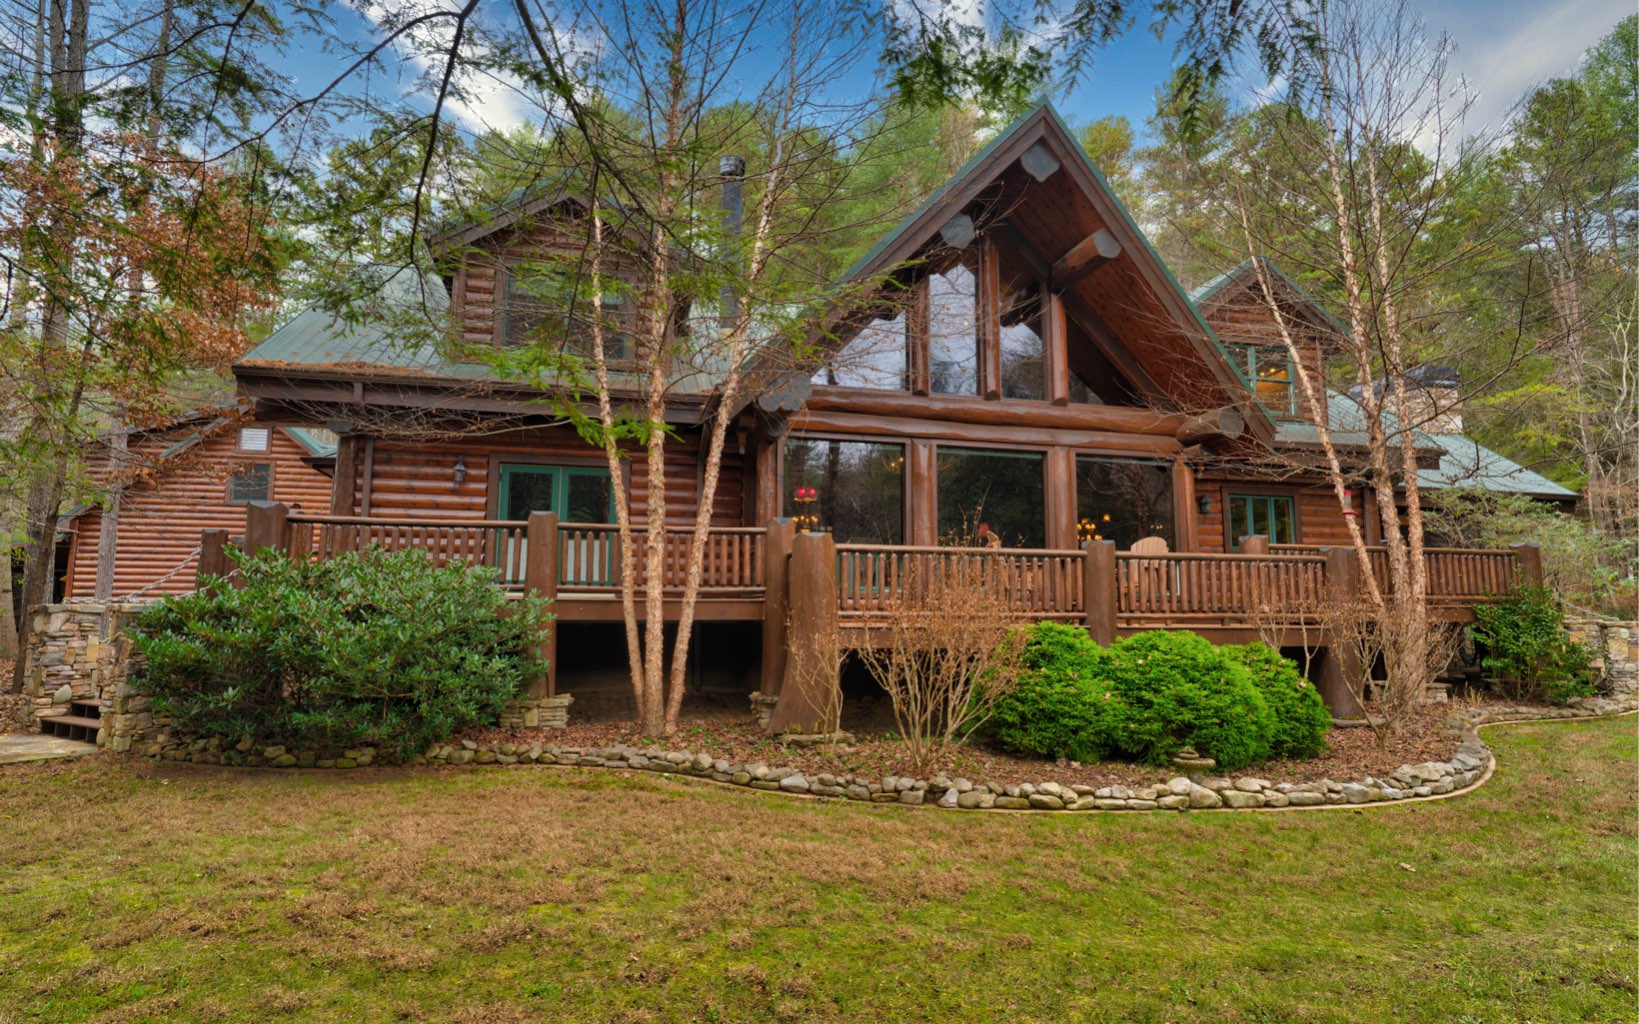 Once in a lifetime opportunity to own a large-log timber frame home with almost 300 feet of frontage in Fannin County on the sought after upper Toccoa River! Centrally located less than 35 minutes to both Blue Ridge and Blairsville. Nearly 4 acres of natural landscape and gentle entry with natural stone steps to the mild rapids of the Toccoa River. Paved road access and end of road privacy with the property bordering the national forest across the river. Expansive great room with huge windows, a tall timber frame ceiling, large stacked-stone wood-burning fireplace, a chef’s dream kitchen with an oversize island, copper sink & backsplash, double oven, warming drawer, Five-Star gas stove, custom quarter-sawn dark oak cabinetry, butler’s pantry & separate dining area. The main floor oversize master bedroom boast beautiful spa-like bath, heated floors, copper soaking tub and a large walk-in closet. There is also a home office space/guest room just off the foyer. The upper-level features 3 more bedrooms, game loft, and gorgeous bathroom. Off the kitchen is a magnificent screened-in timber frame porch with a second stacked-stone wood burning fireplace. Add in the full-length outdoor deck overlooking the Toccoa River, herb garden spot, oversize detached garage with carport and a second-floor workshop with equipment lift & two additional storage rooms for the envy of all outdoor spaces. Don't forget the backup Generac-super quiet generator. Come see this showcase custom home today.